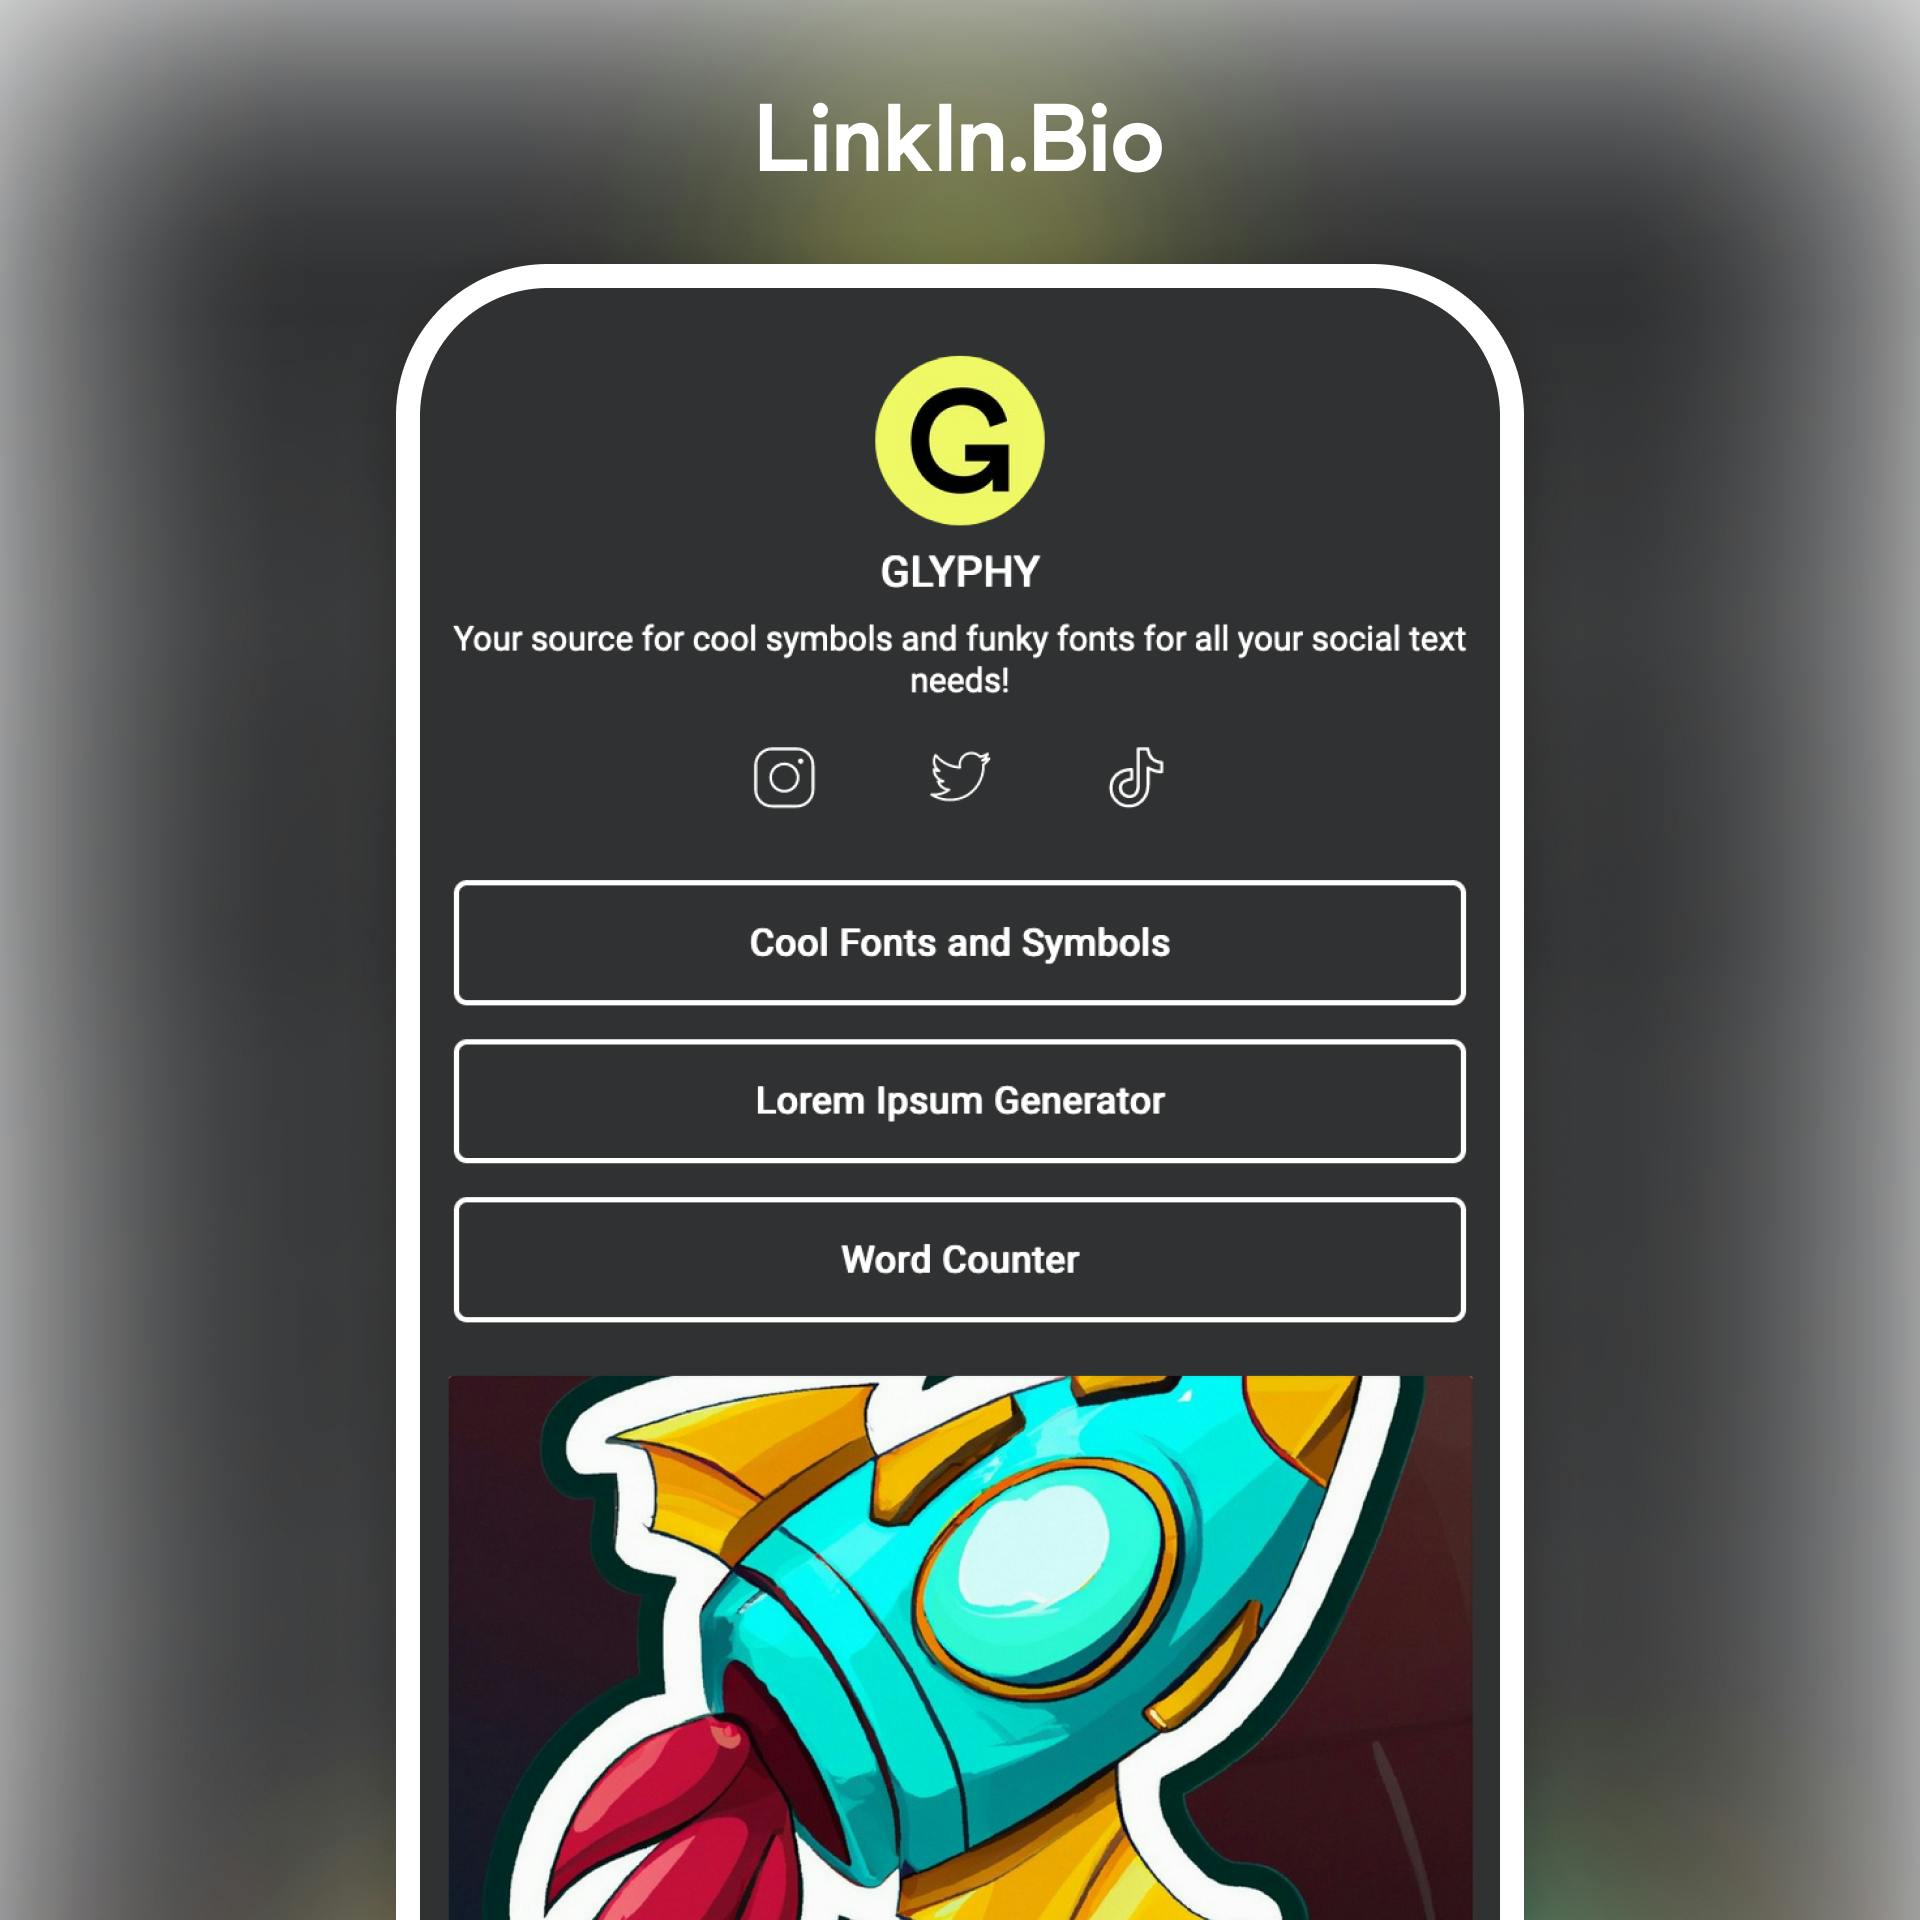 LinkIn.Bio link in bio tool example profile on a mobile device